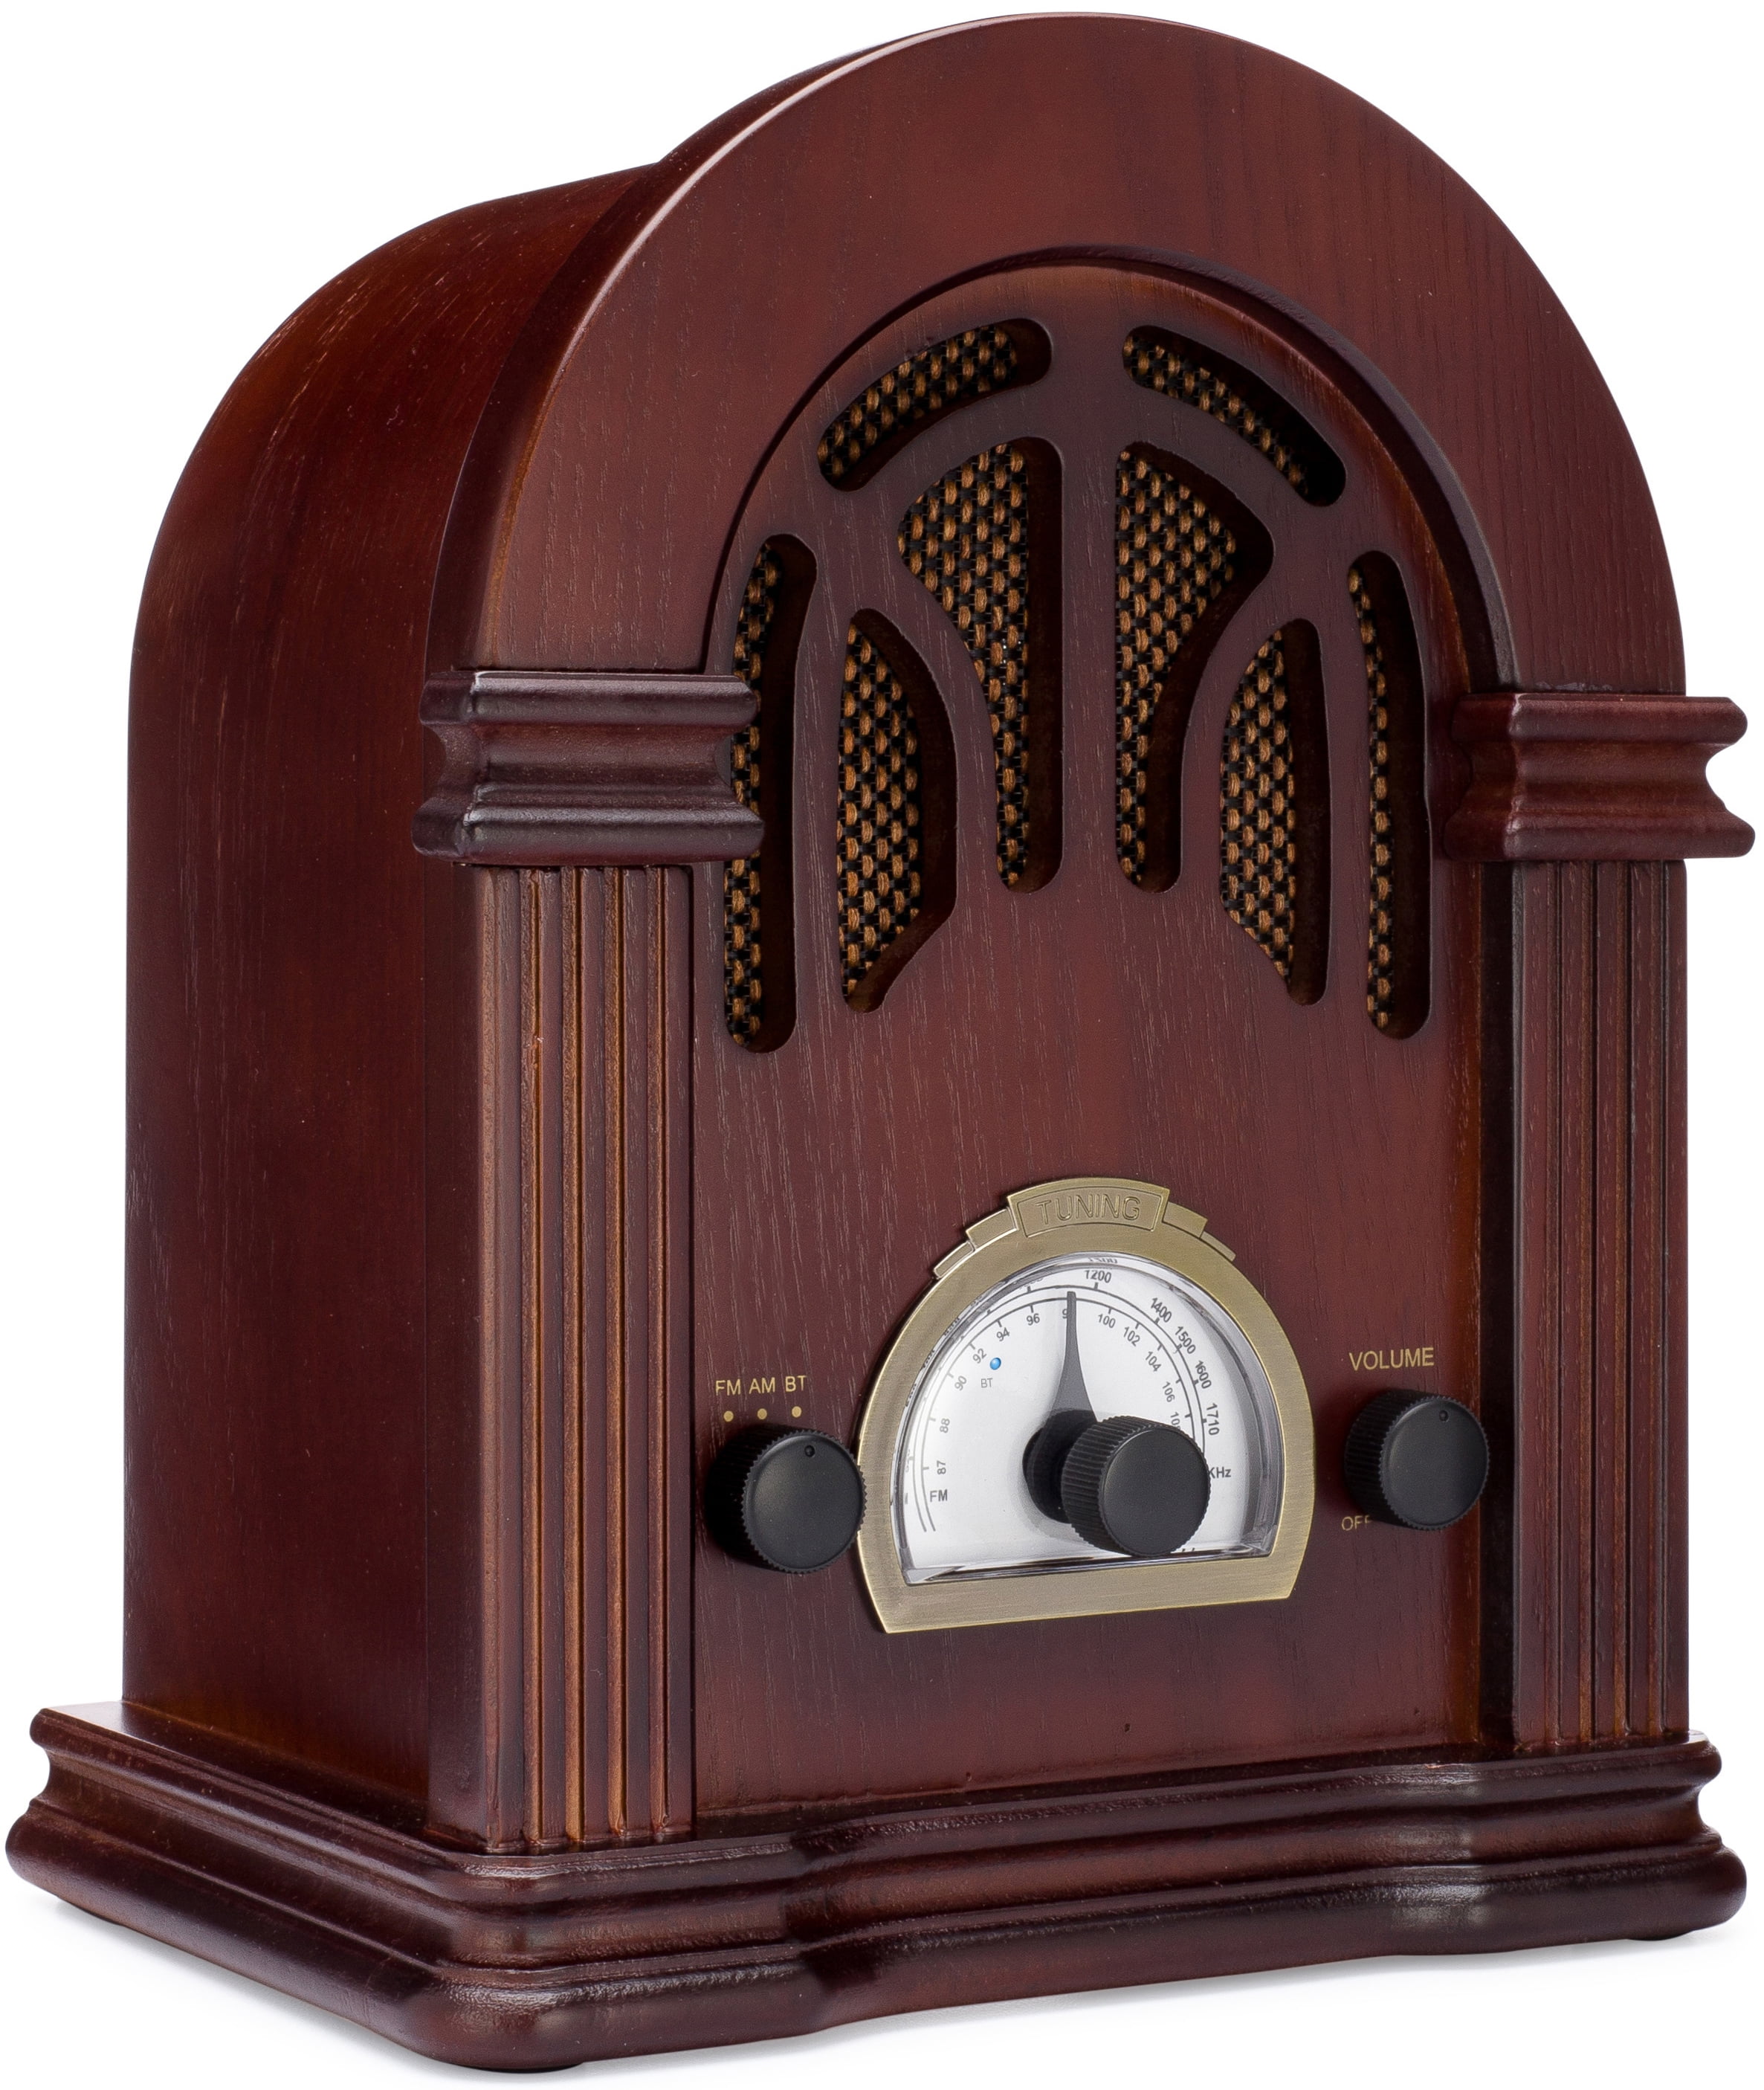 ClearClick Retro AM/FM Radio with Bluetooth - Classic Wooden